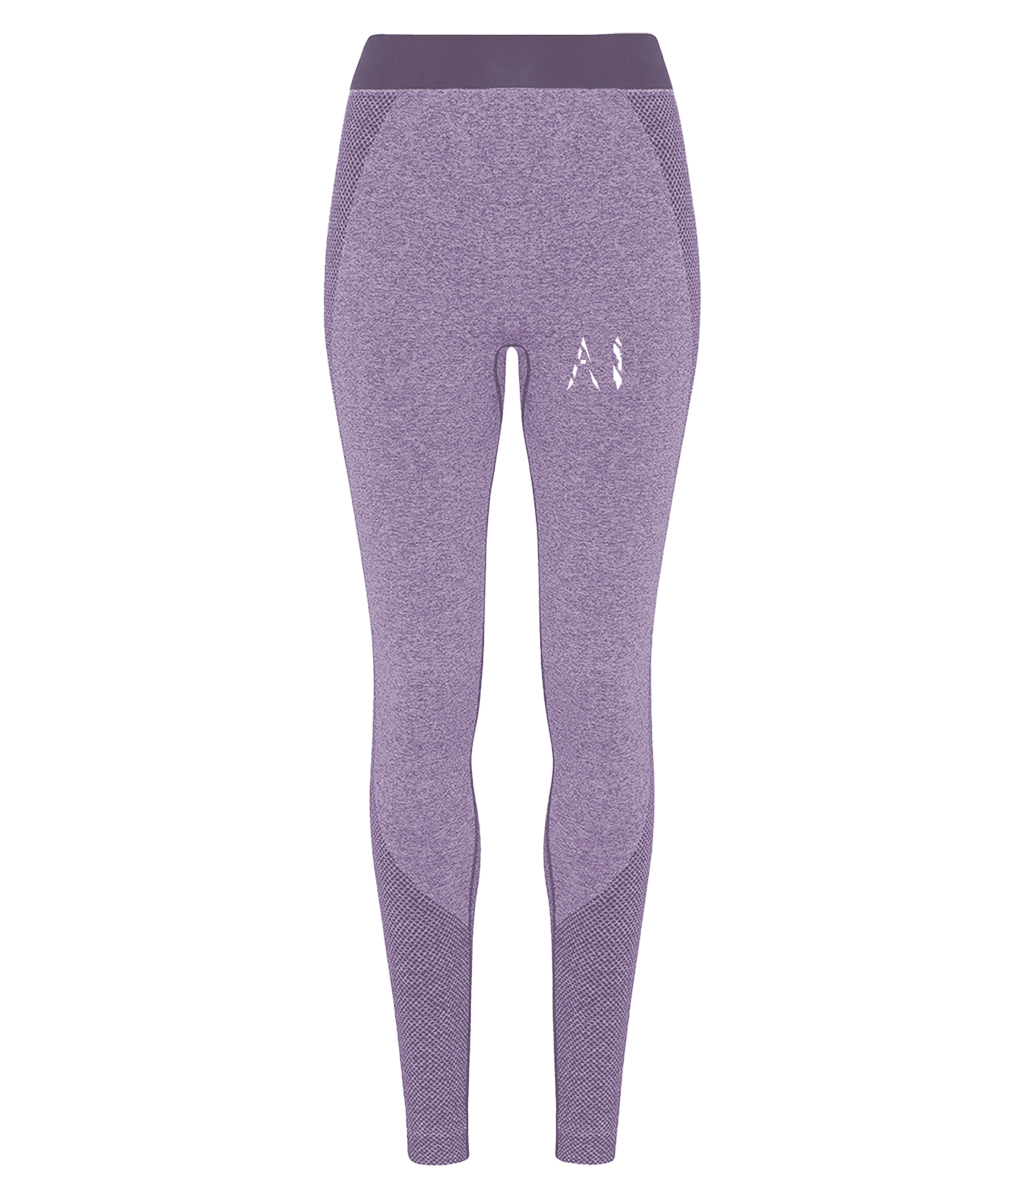 Womens purple Athletic Seamless Sports Leggings with White AI logo on upper thigh